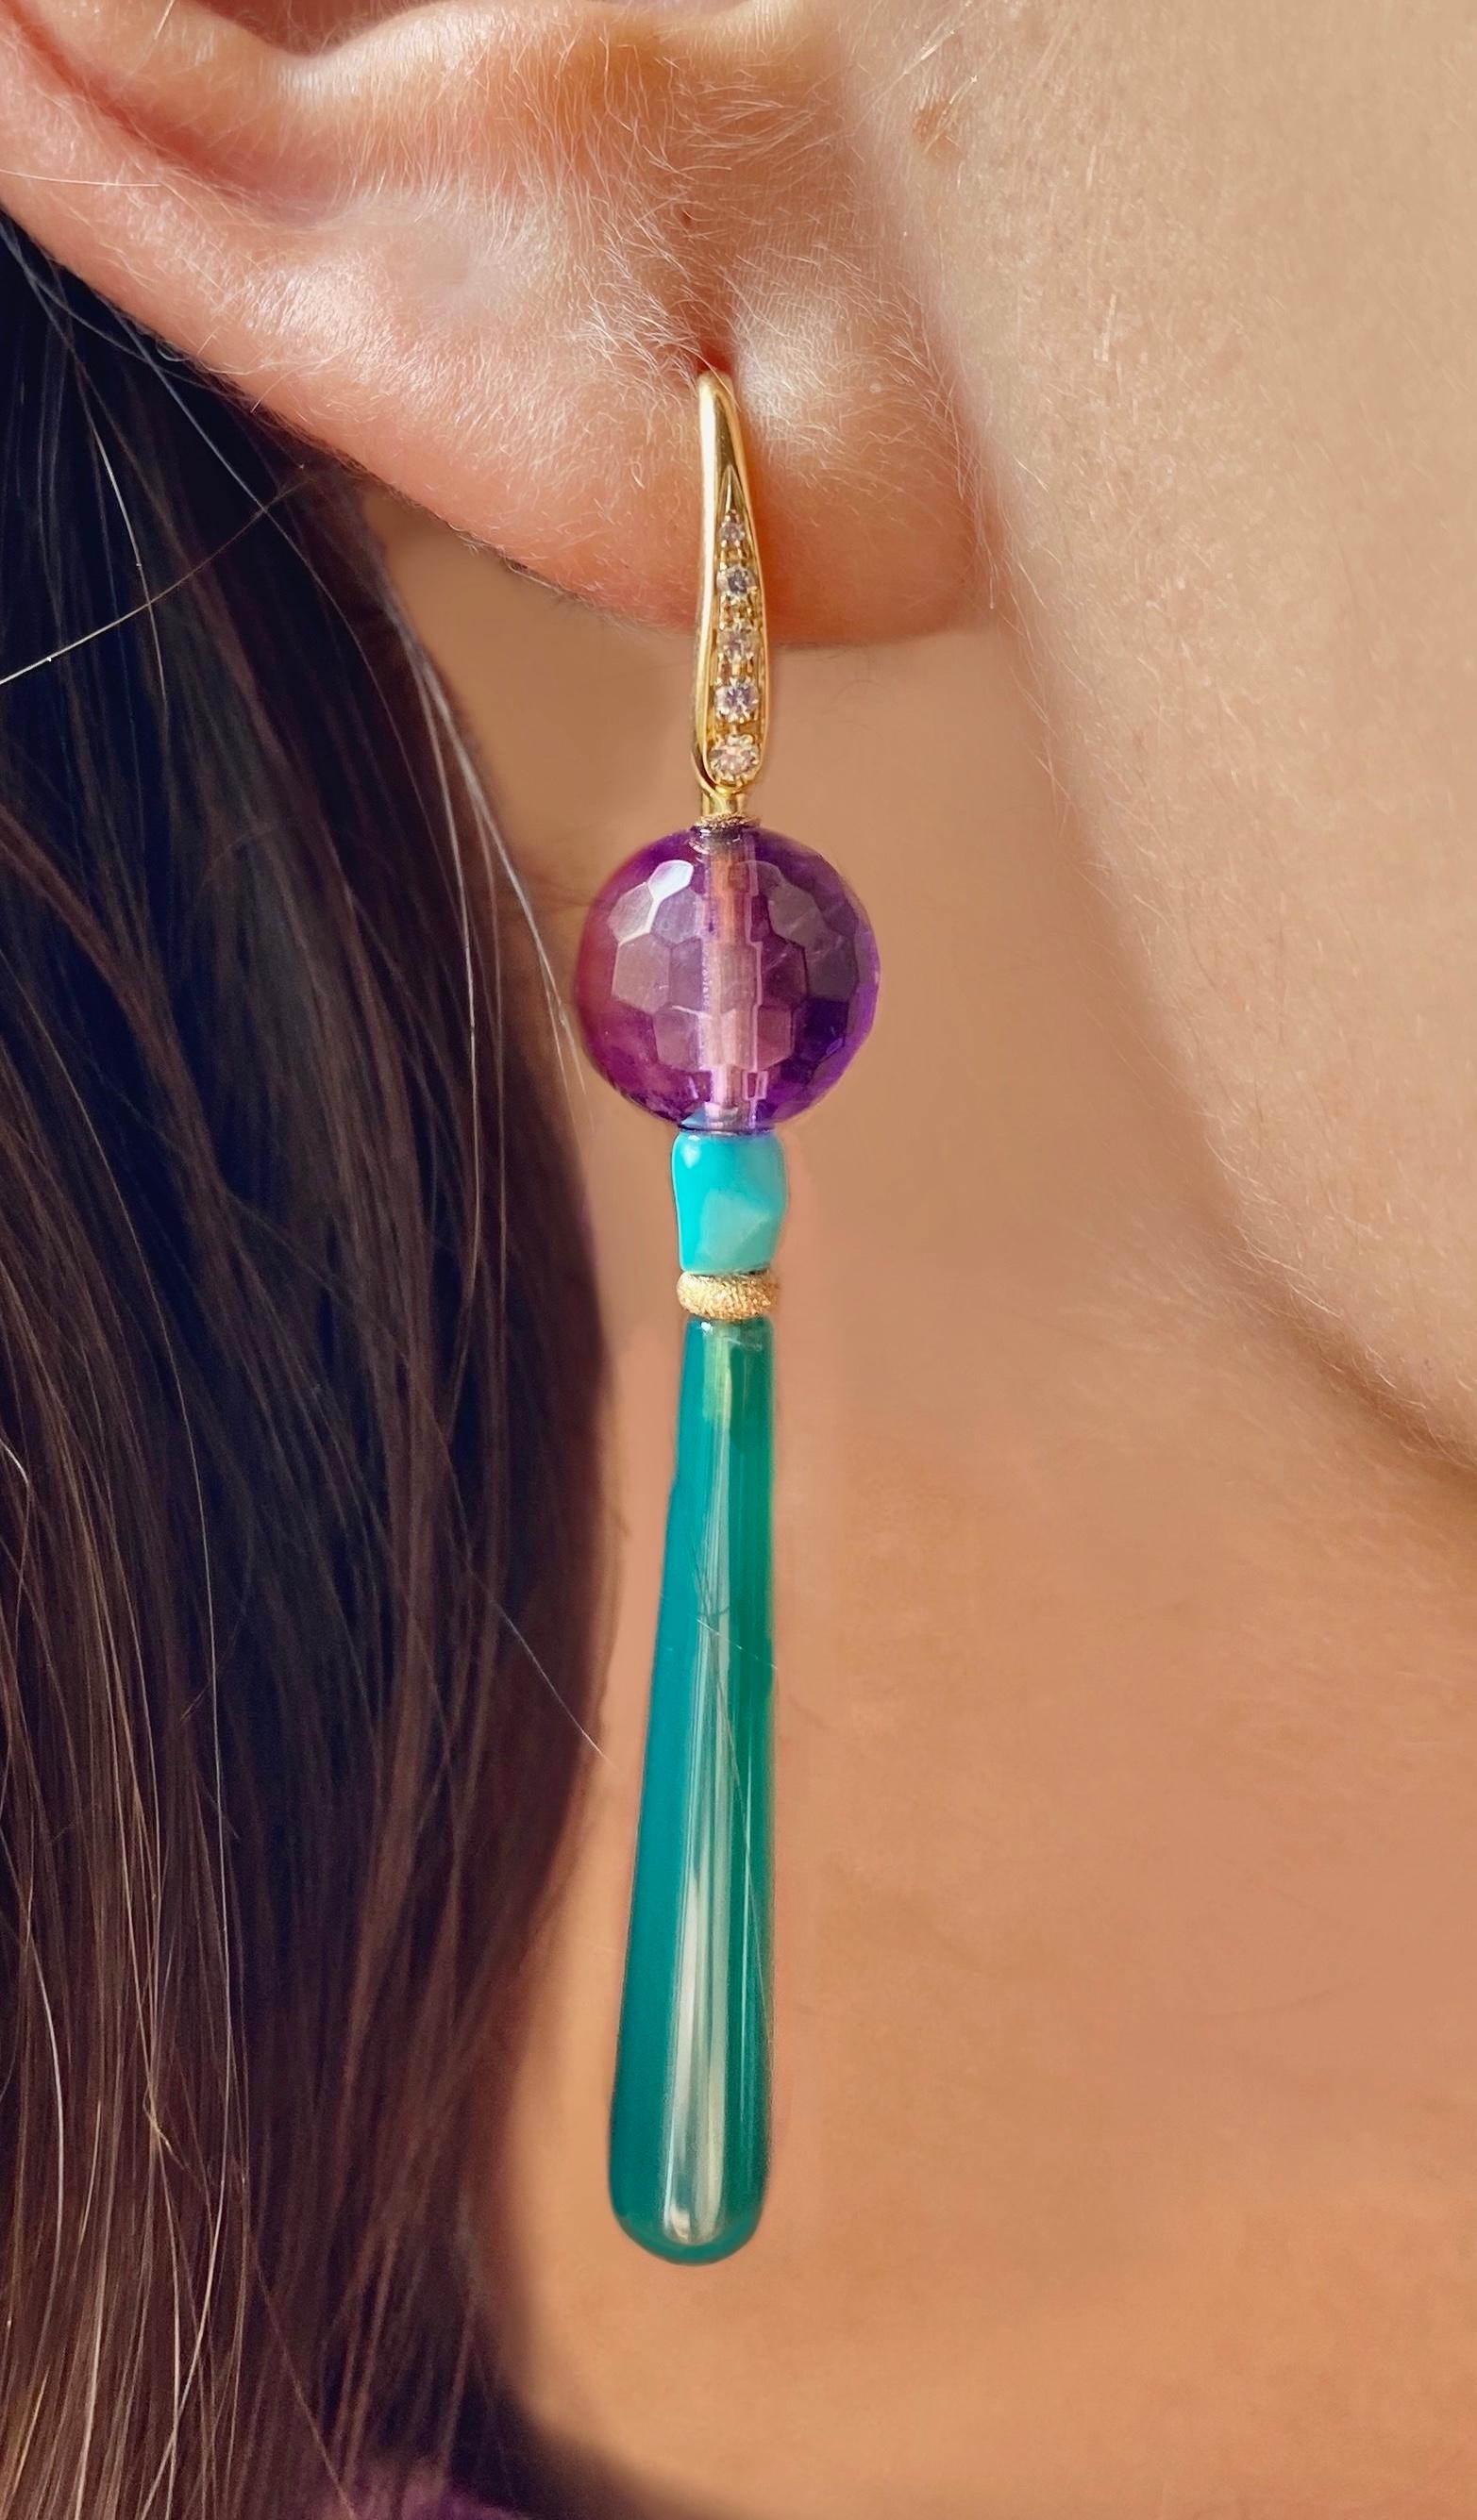 Rossella Ugolini Deco Collection Art Deco Style Amethyst Green Agate Turquoise 18k Yellow Gold Made in Italy Dangle Earring.
The earrings beautifully adorned with smooth, vibrant stones beads, giving it a pop of color and a touch of bohemian charm.